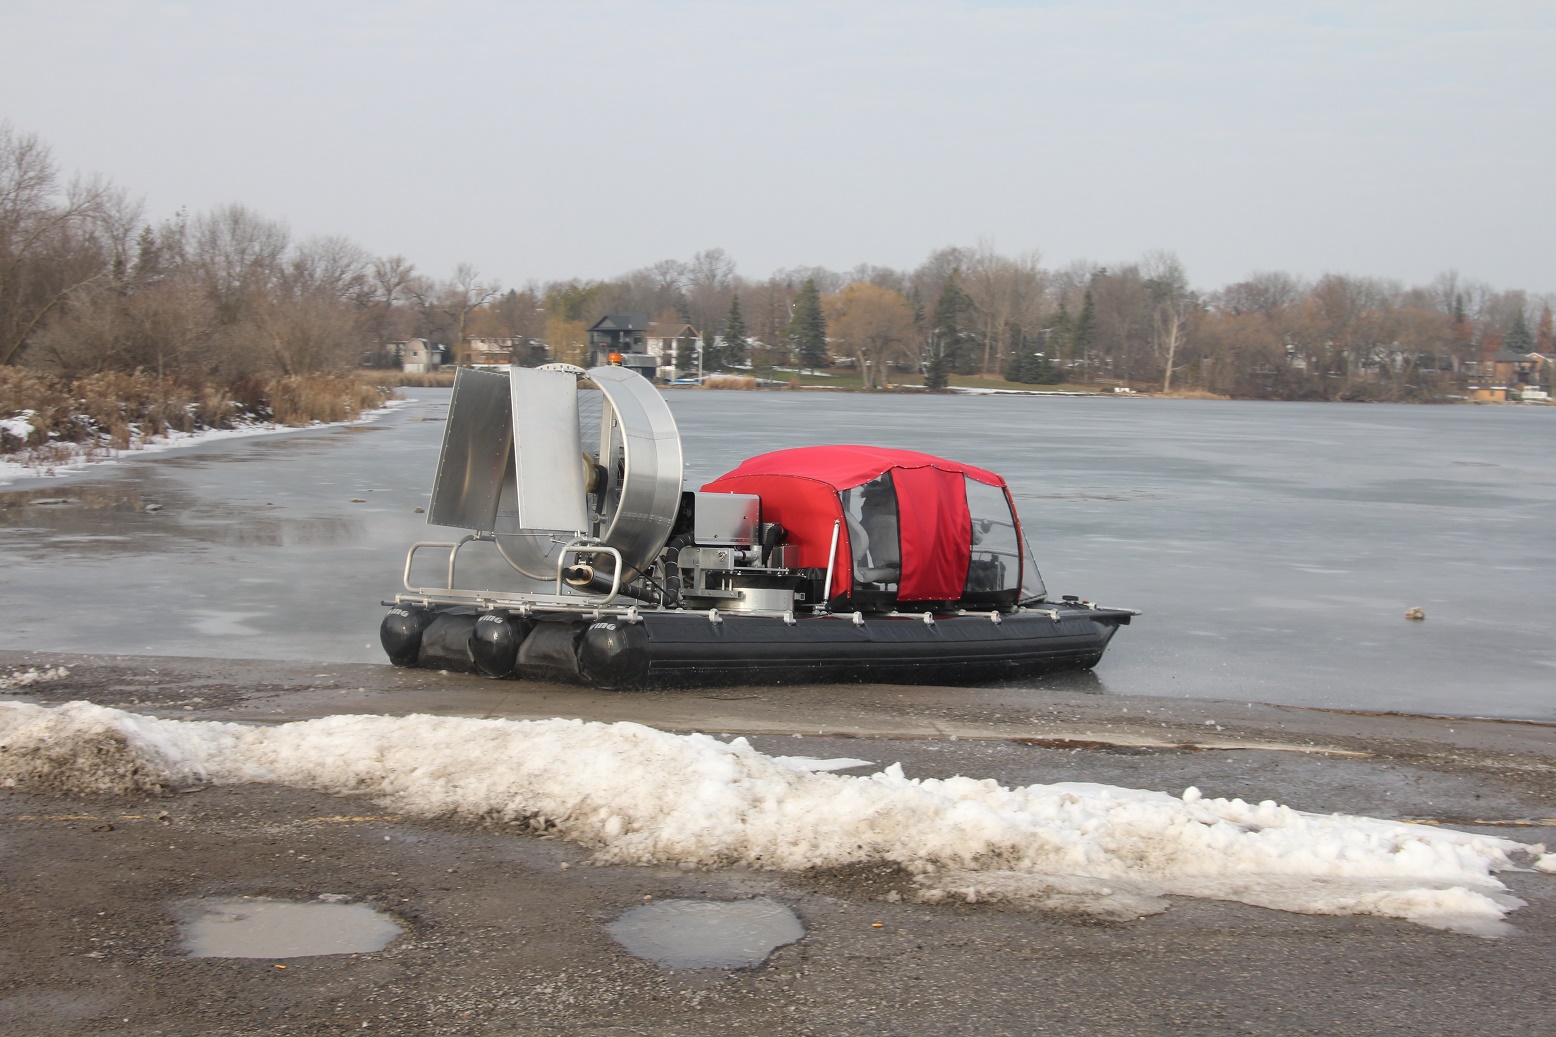 ATASD hovercraft airboat live trials with Canadian Police officers